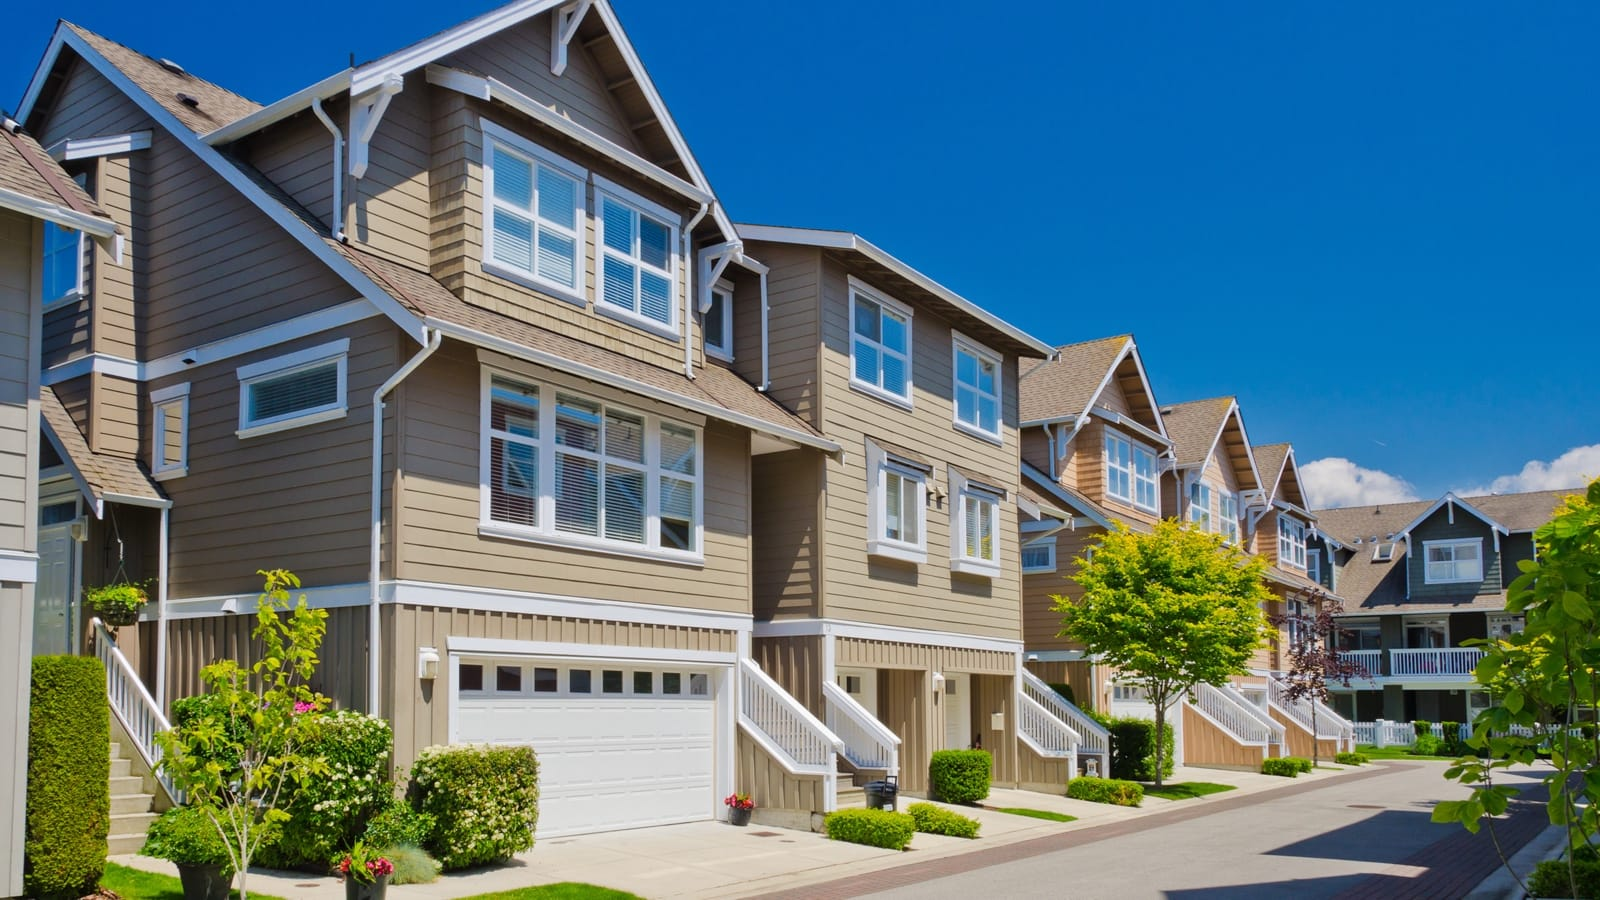 “Affordable Housing Solutions: Bridging Gaps in the Real Estate Market”